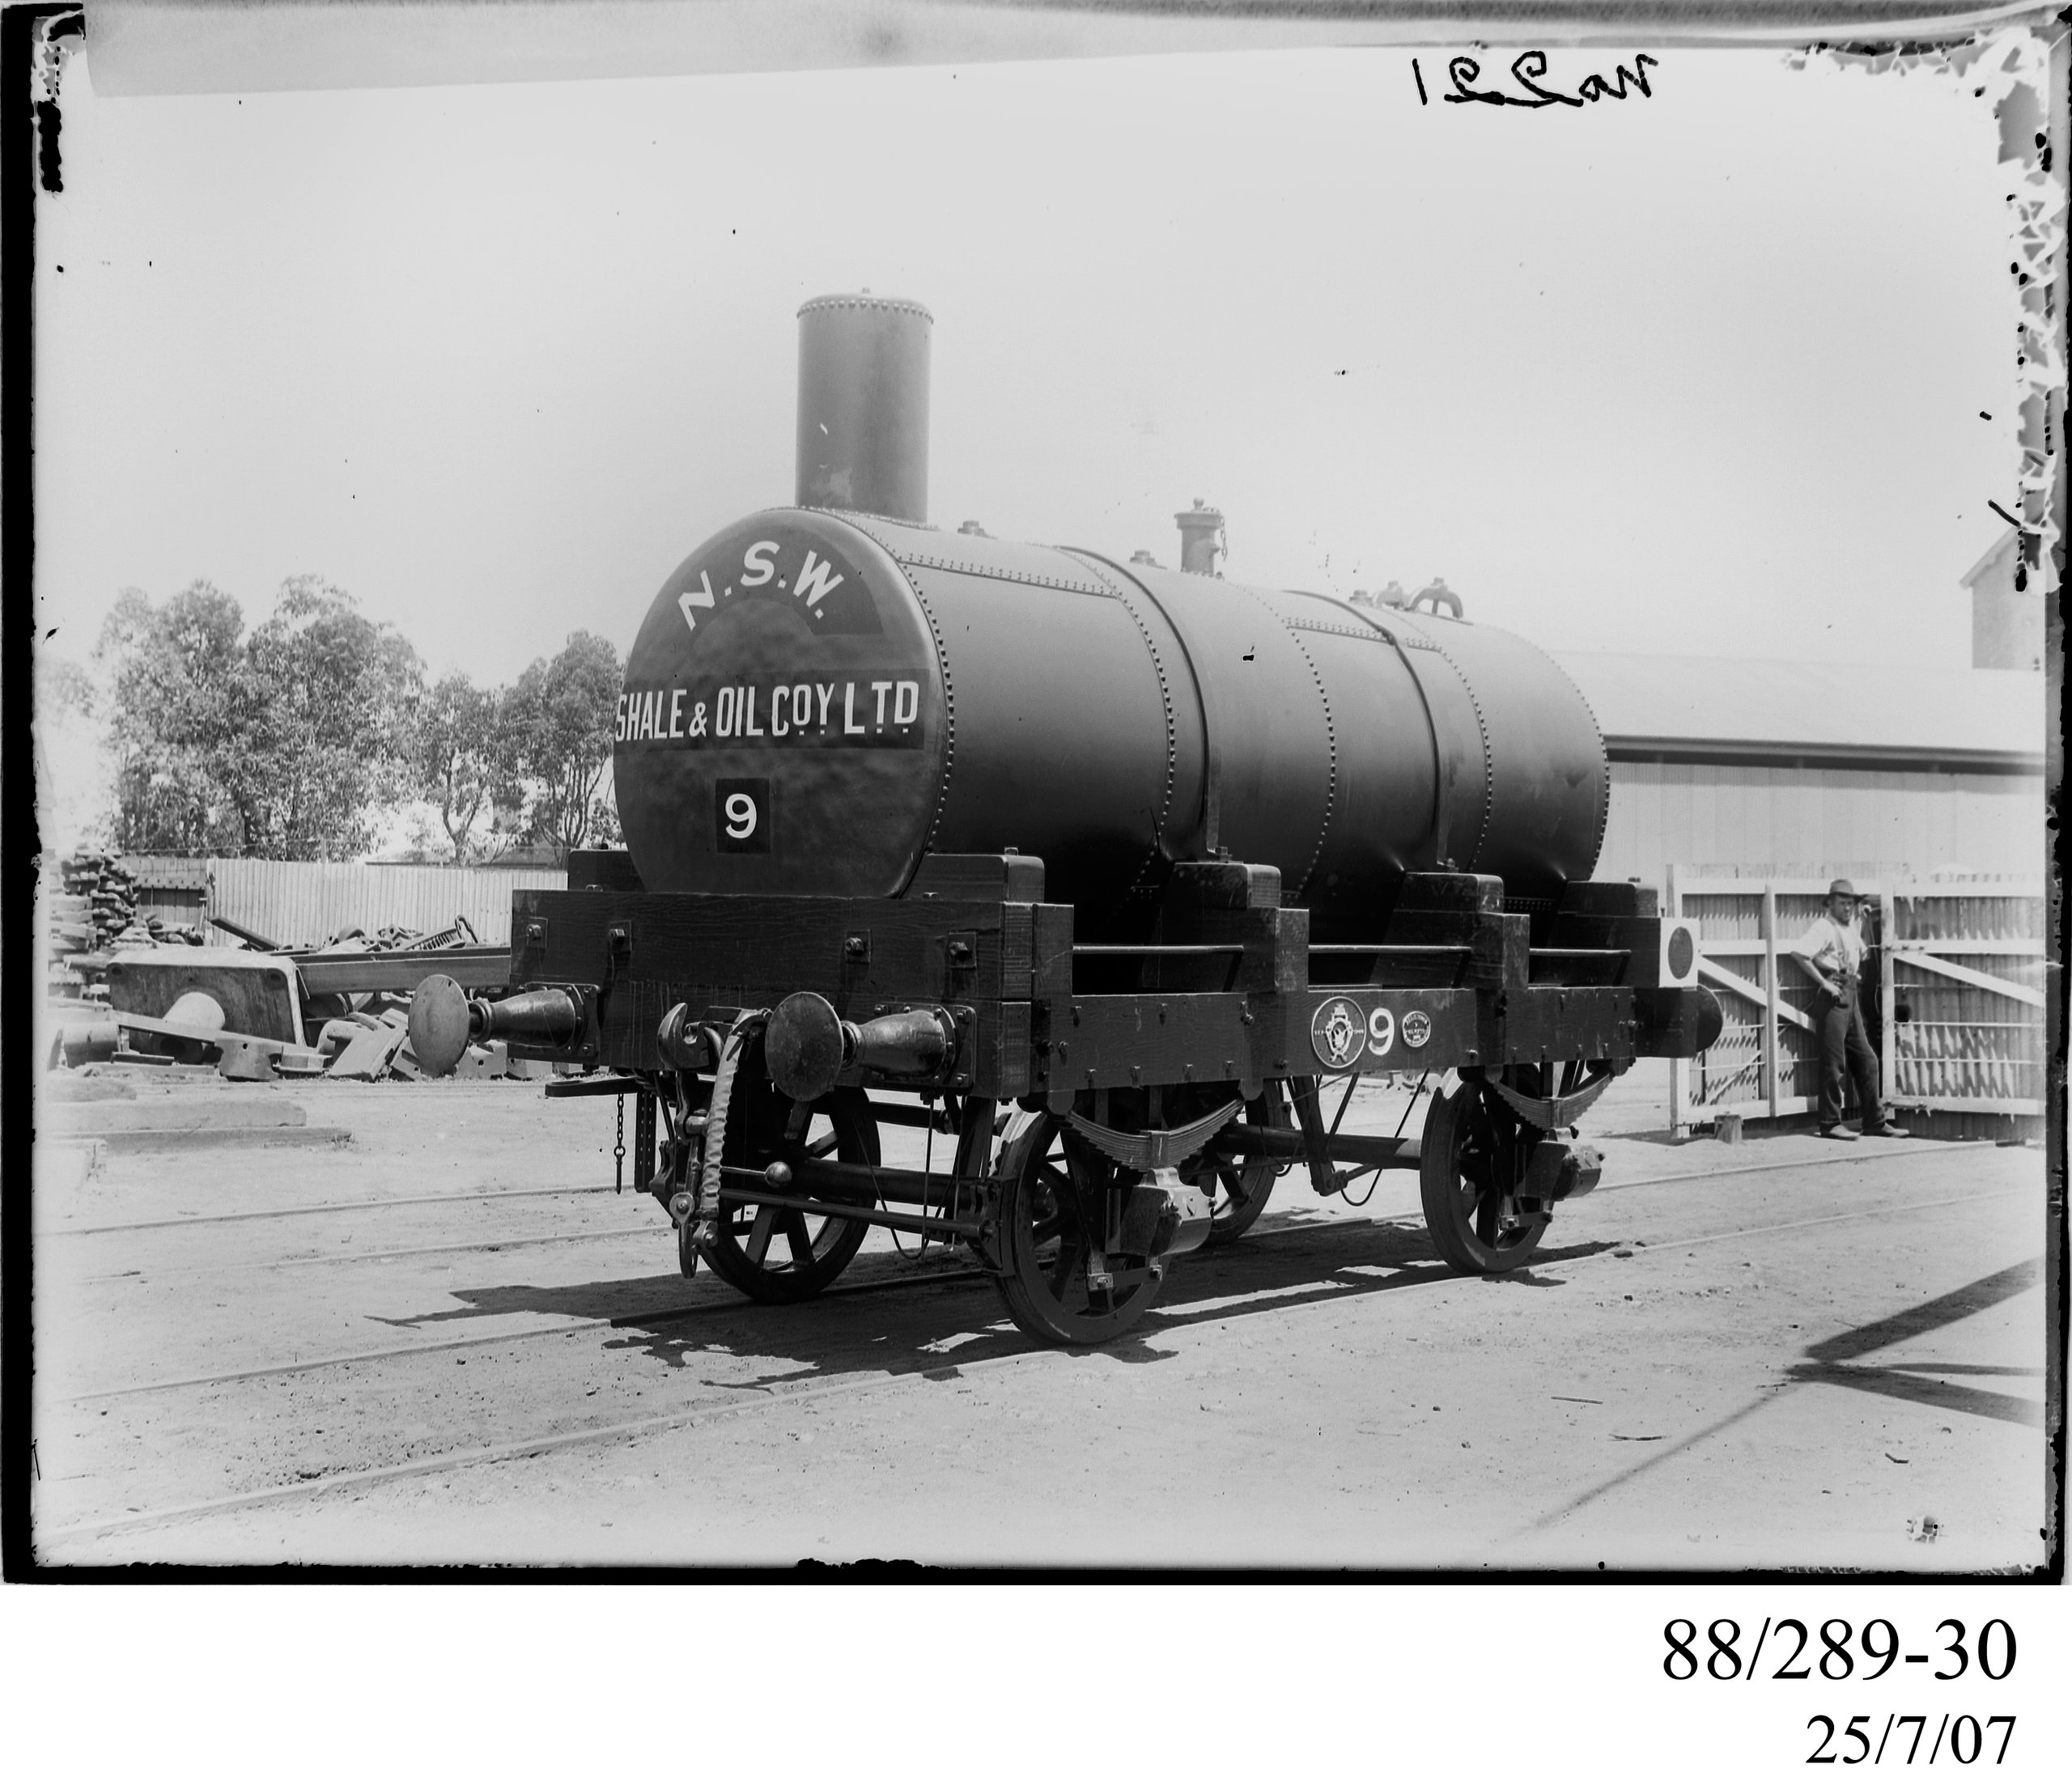 Glass plate negative of NSW Shale and Oil Co. Ltd's tank wagon No.9